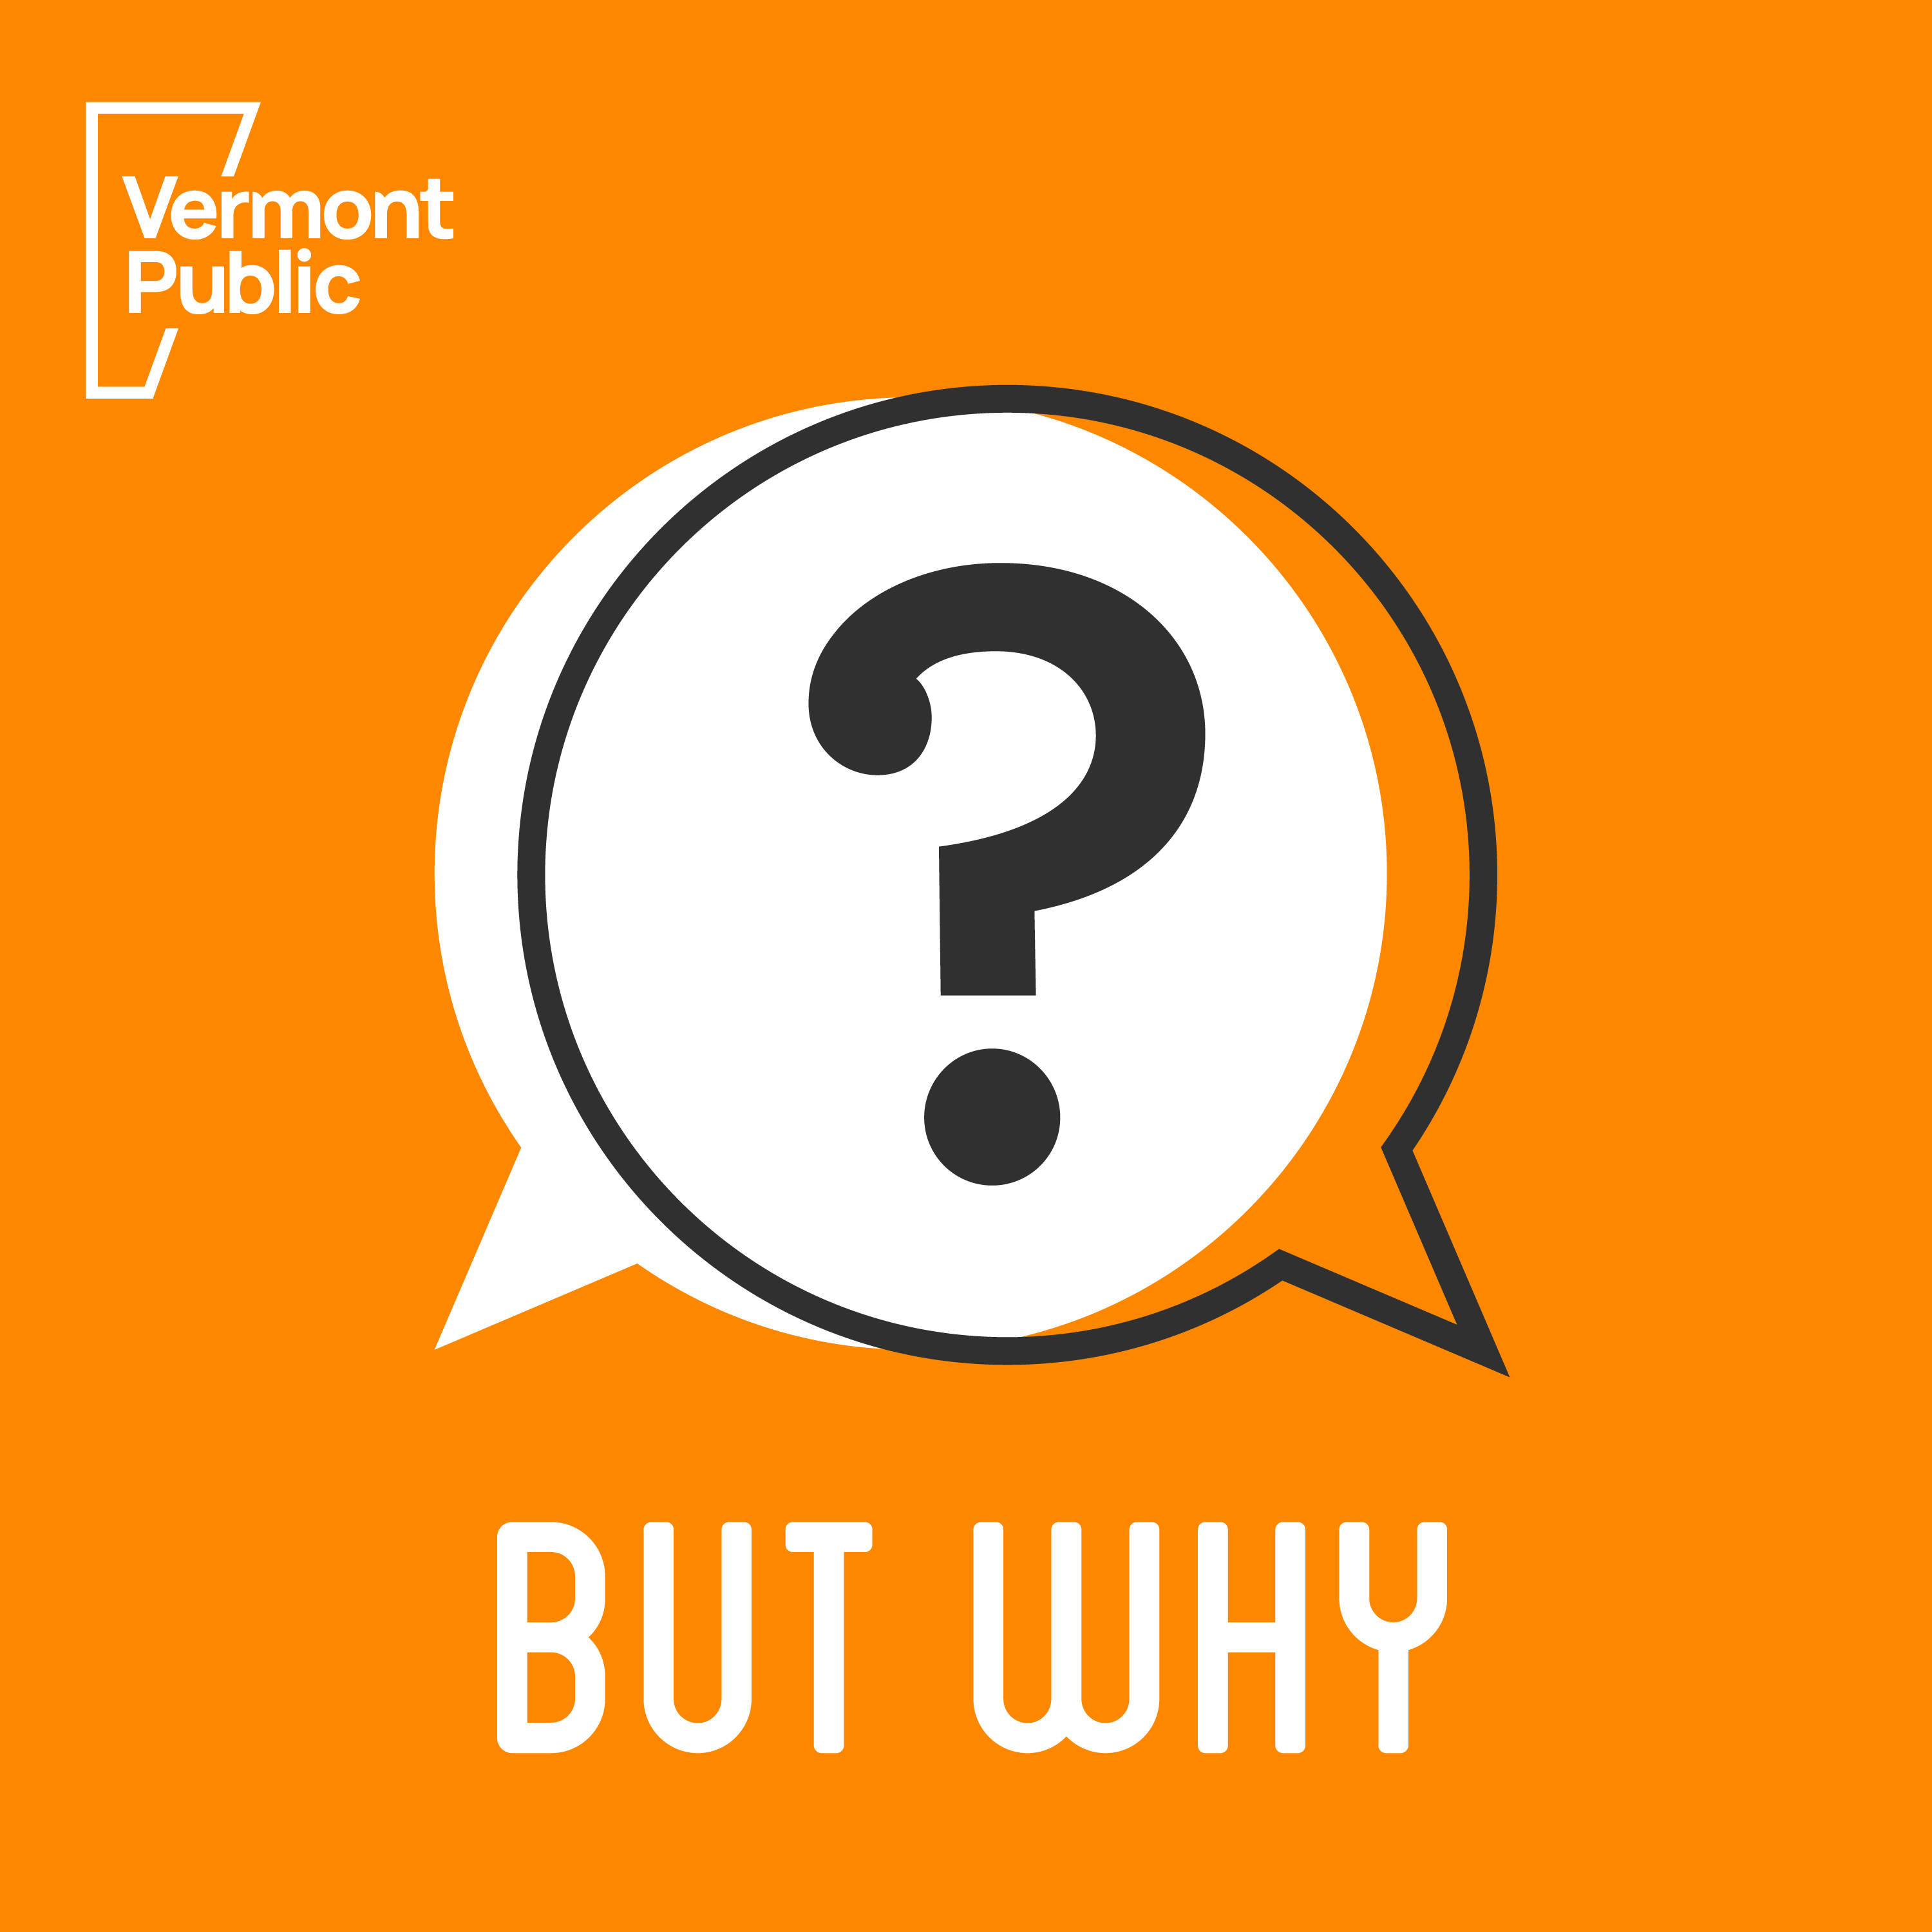 The words "But Why" on an orange background below speech bubbles.